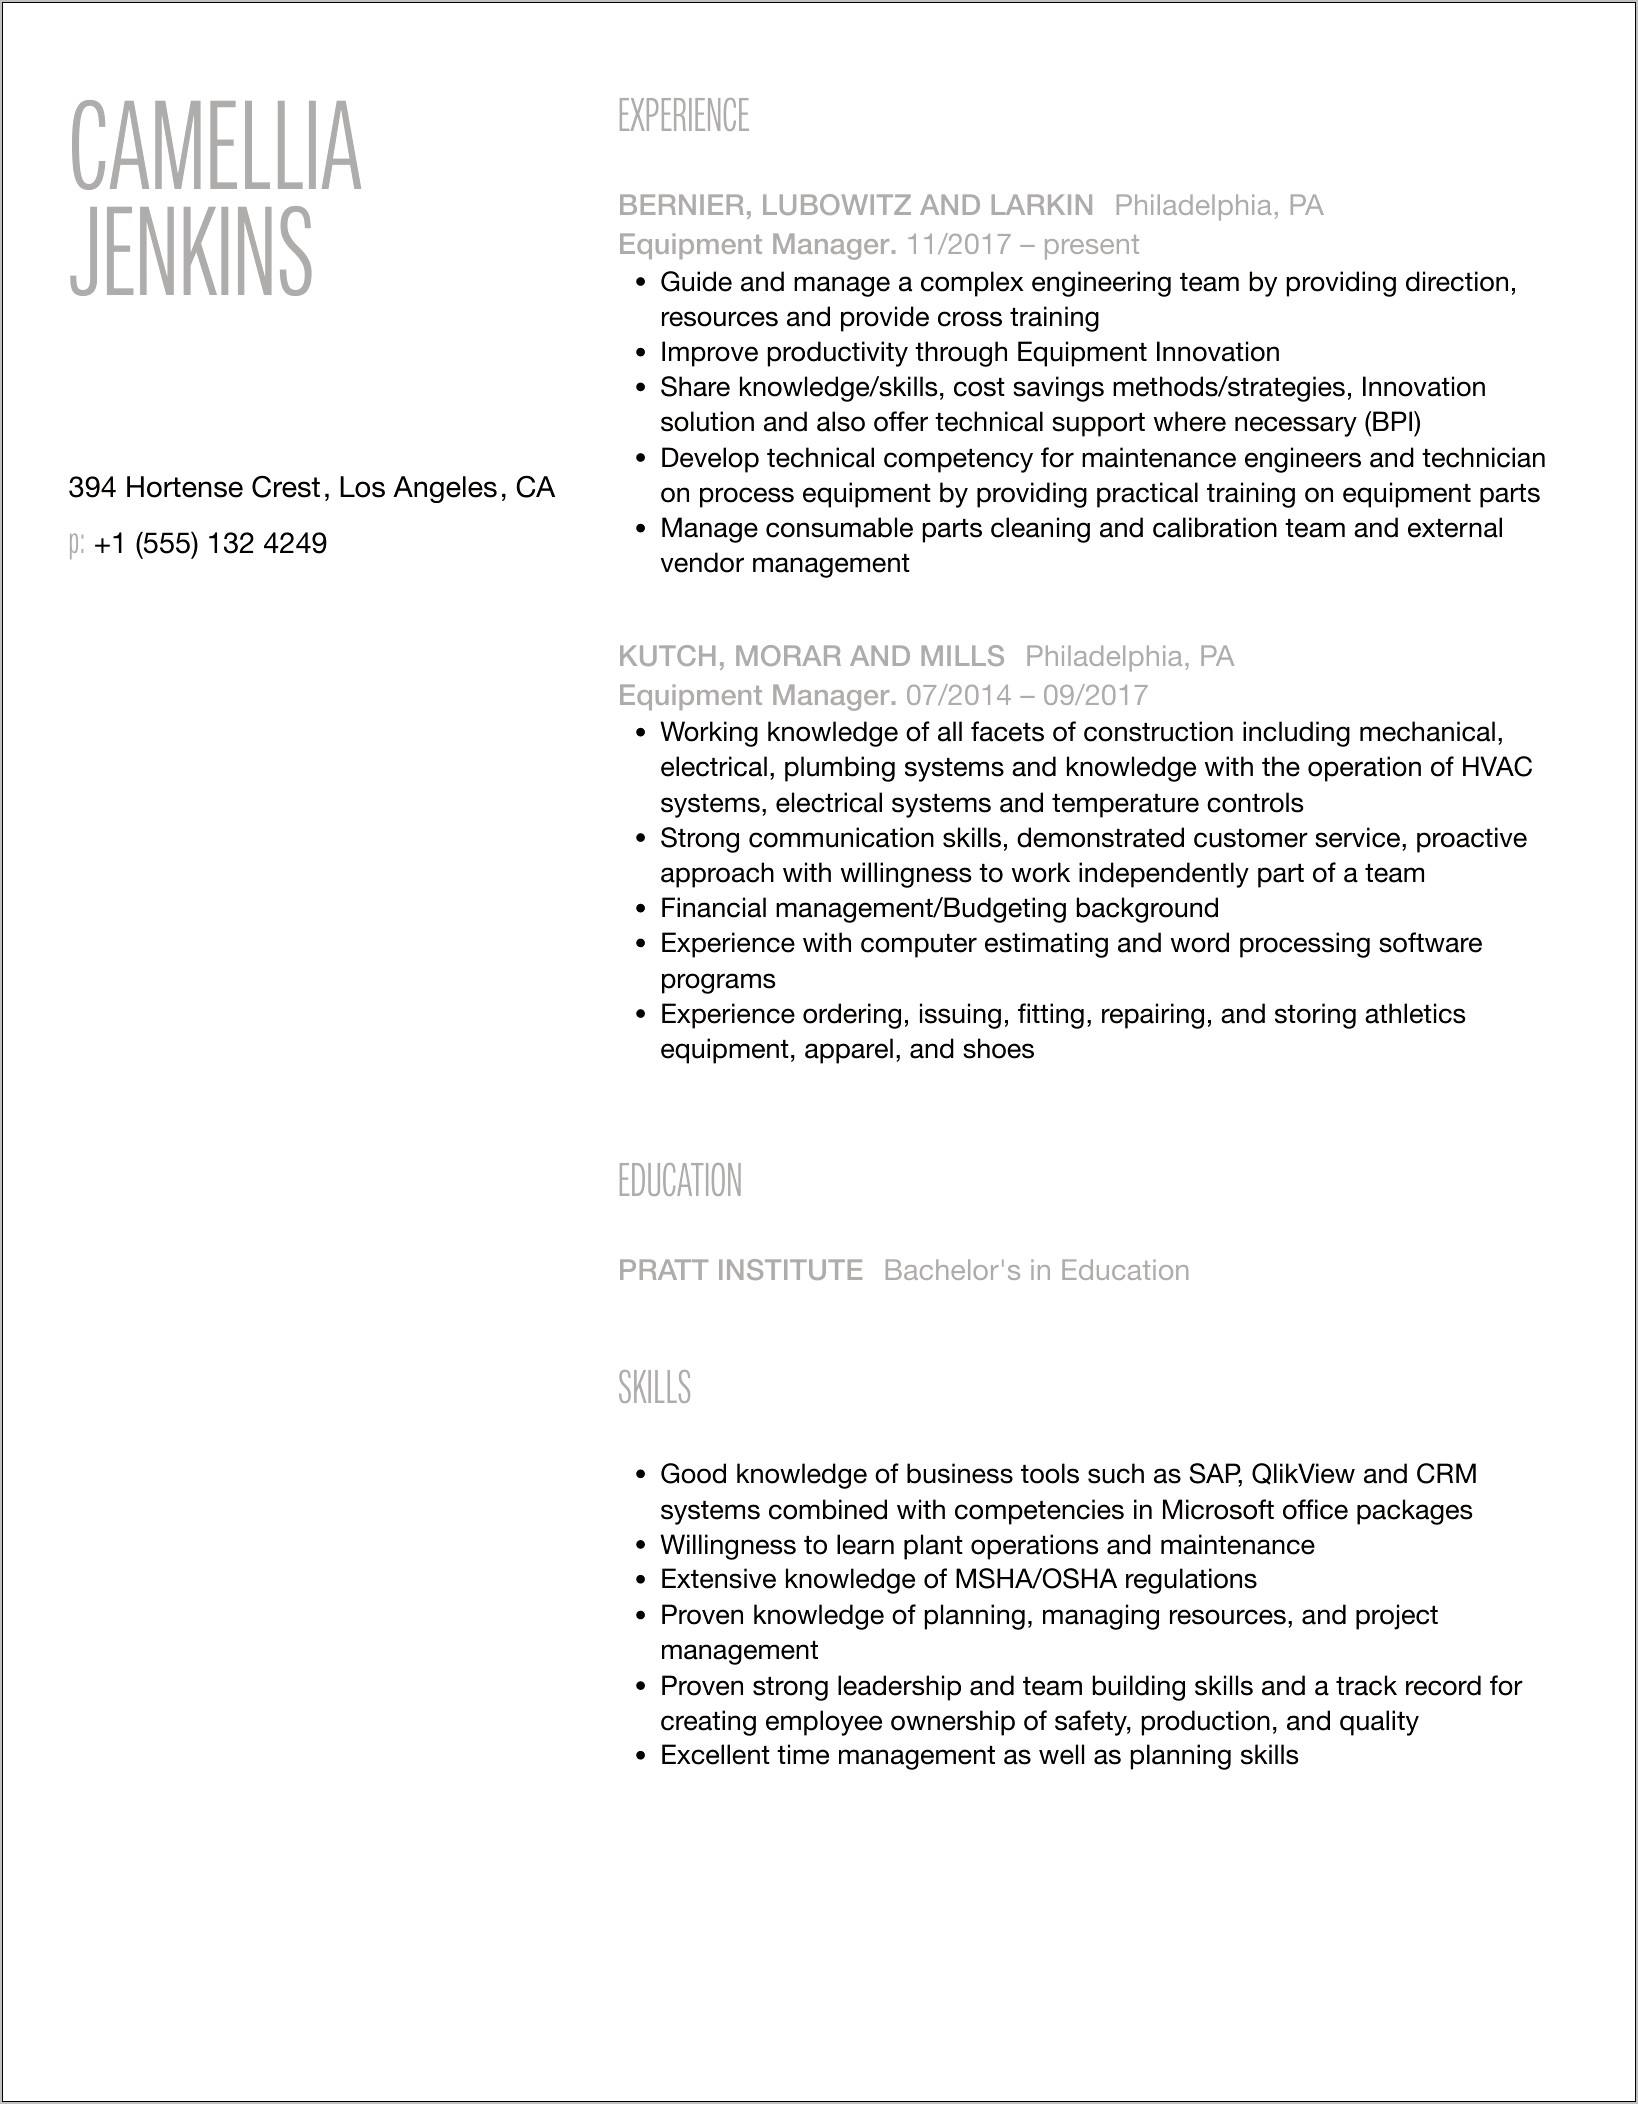 Equipment Rental Manager Resume Objective